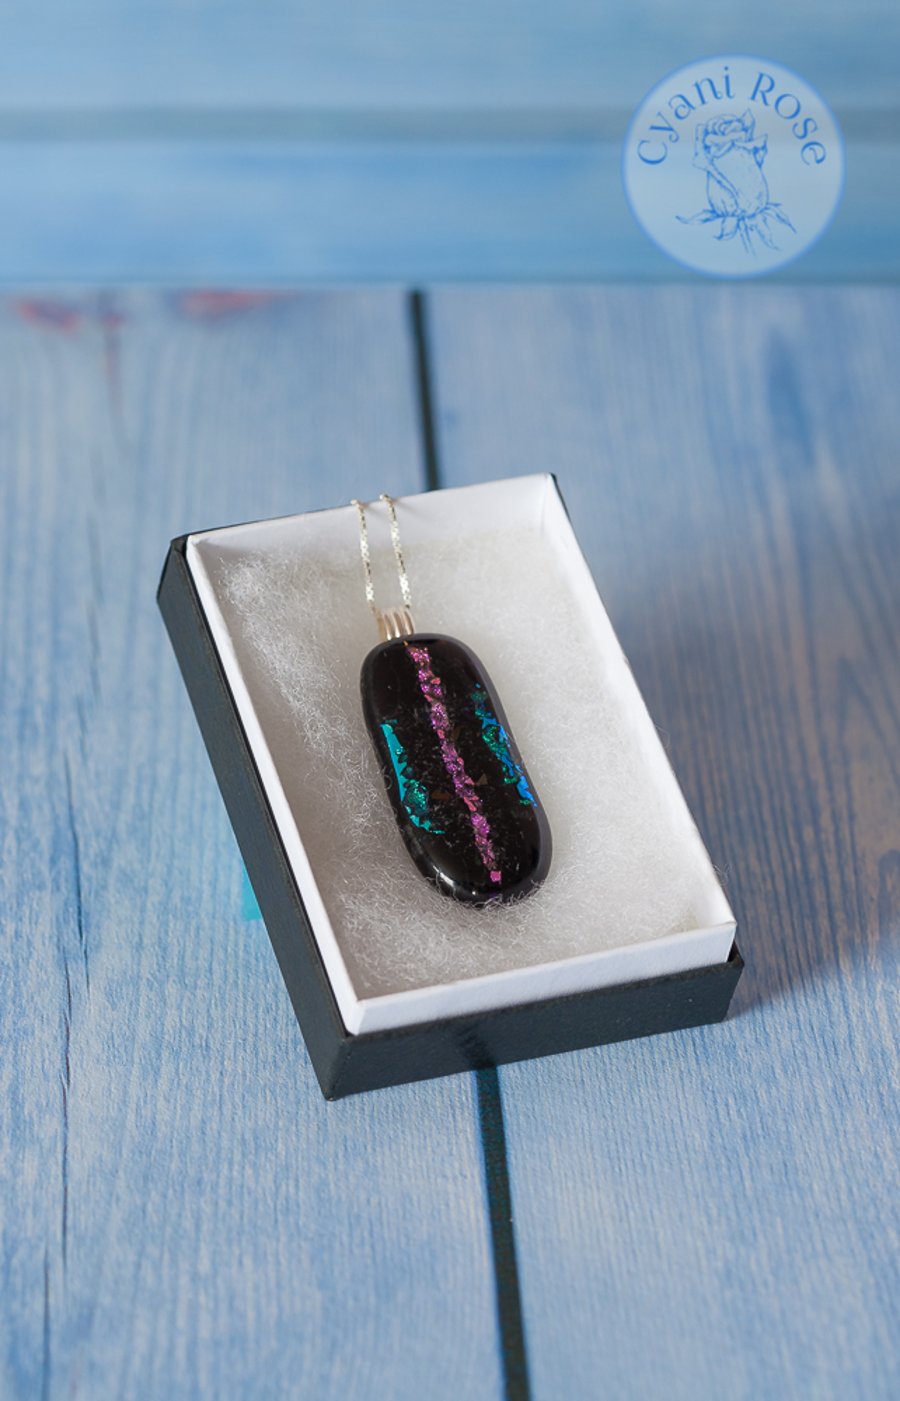 Black fused glass pendant with sparkle stripes in turquoise and pink